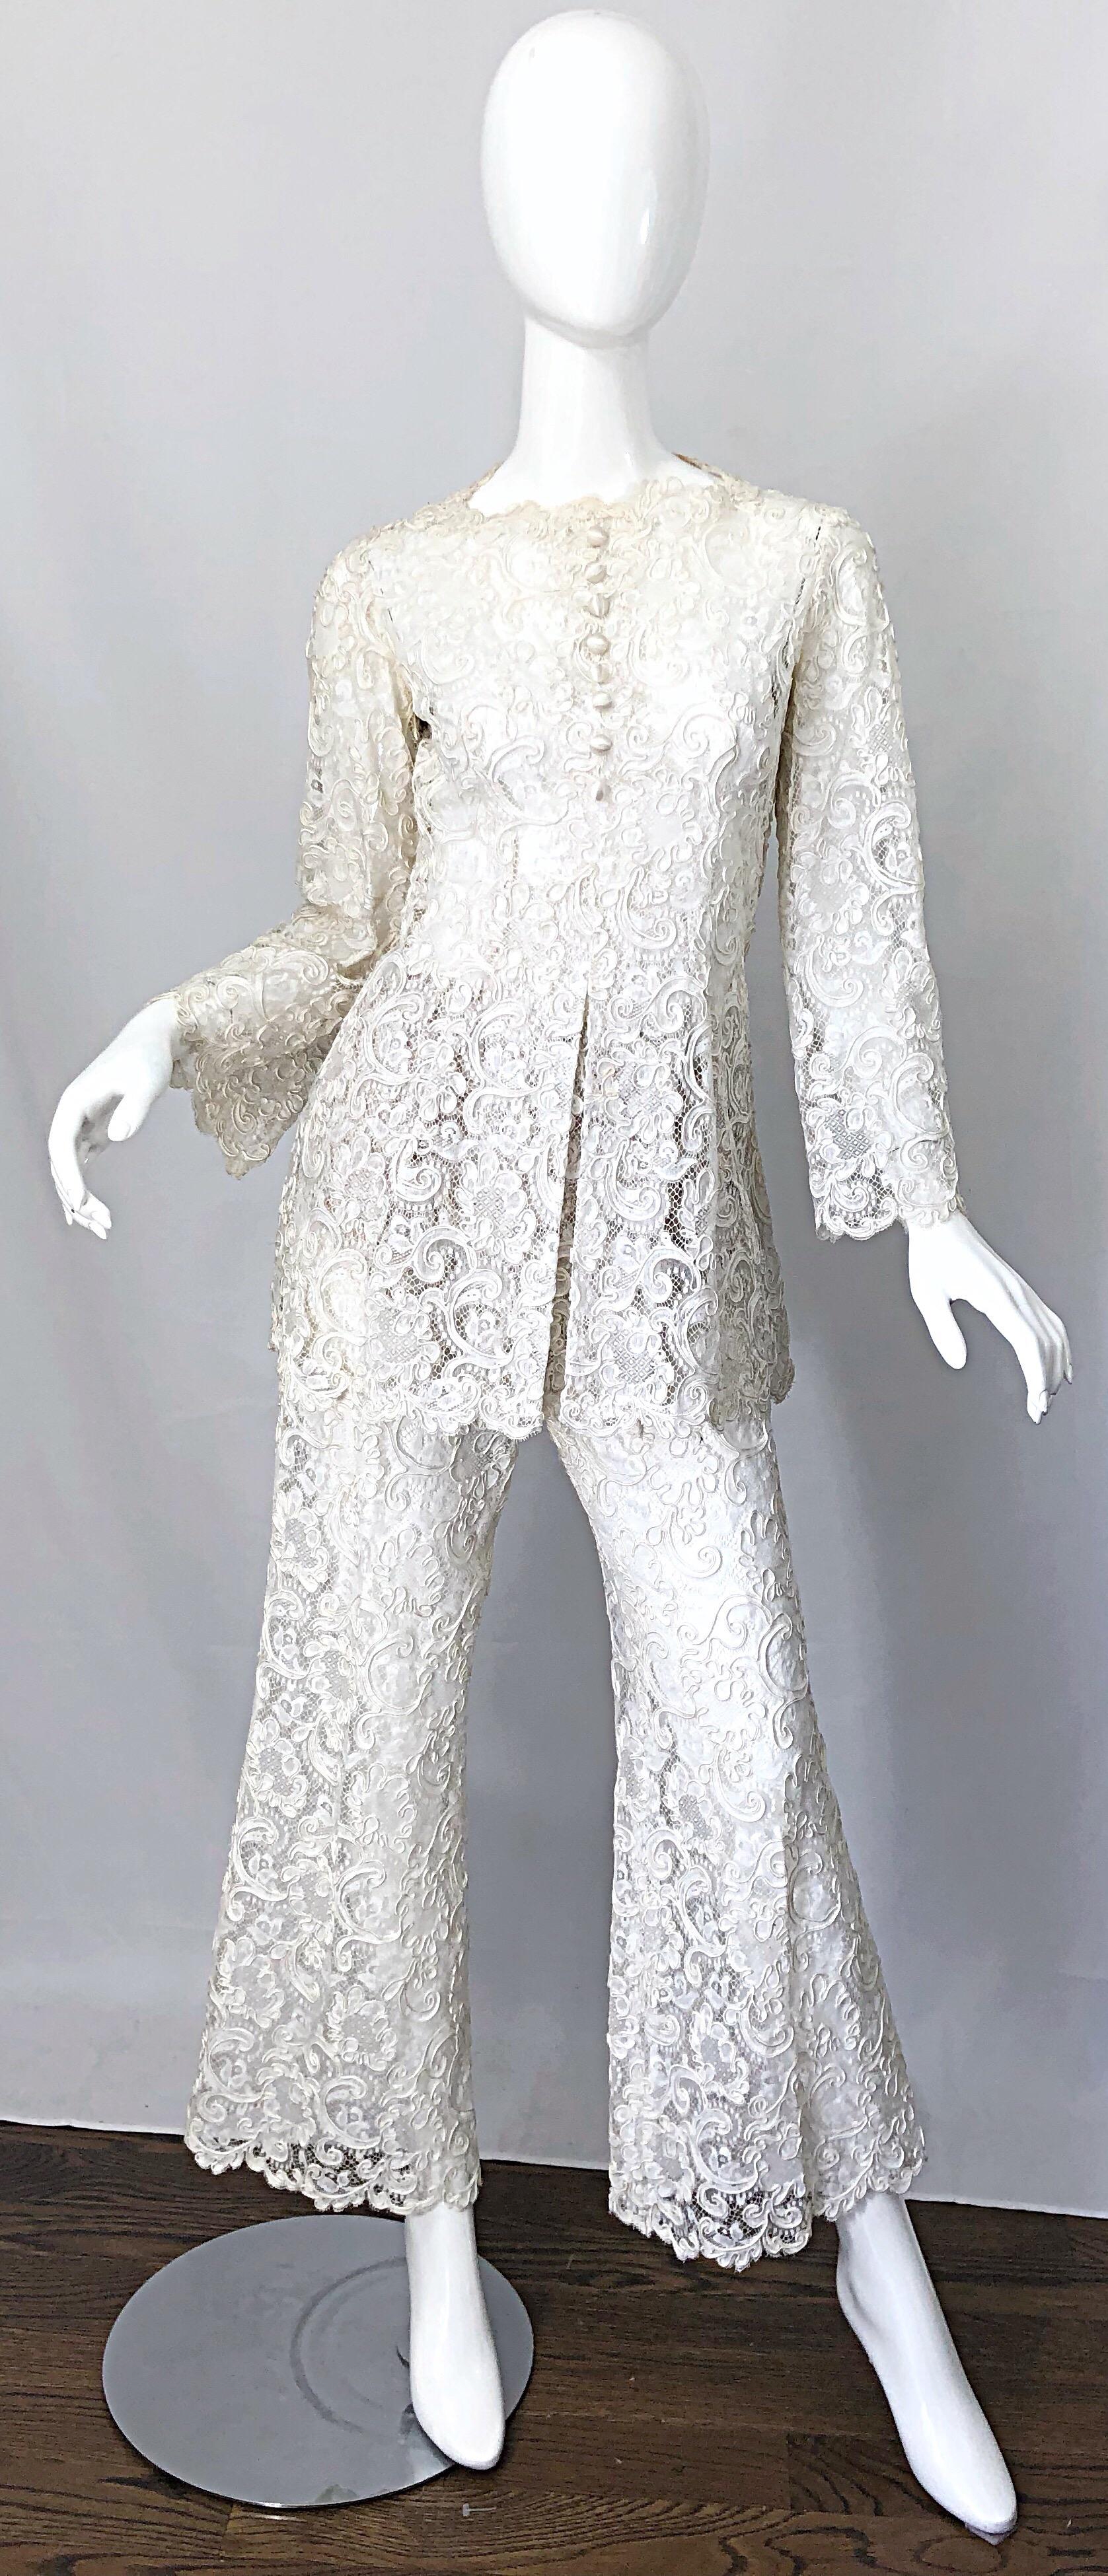 Amazing and Rare vintage YVES SAINT LAURENT 1970s ivory / off - white Belgium lace two piece ensemble! This is seriously one of my favorite YSL pieces ever! The workmanship is insanely good, and mirrors that of haute couture. Semi-sheer ivory lace.